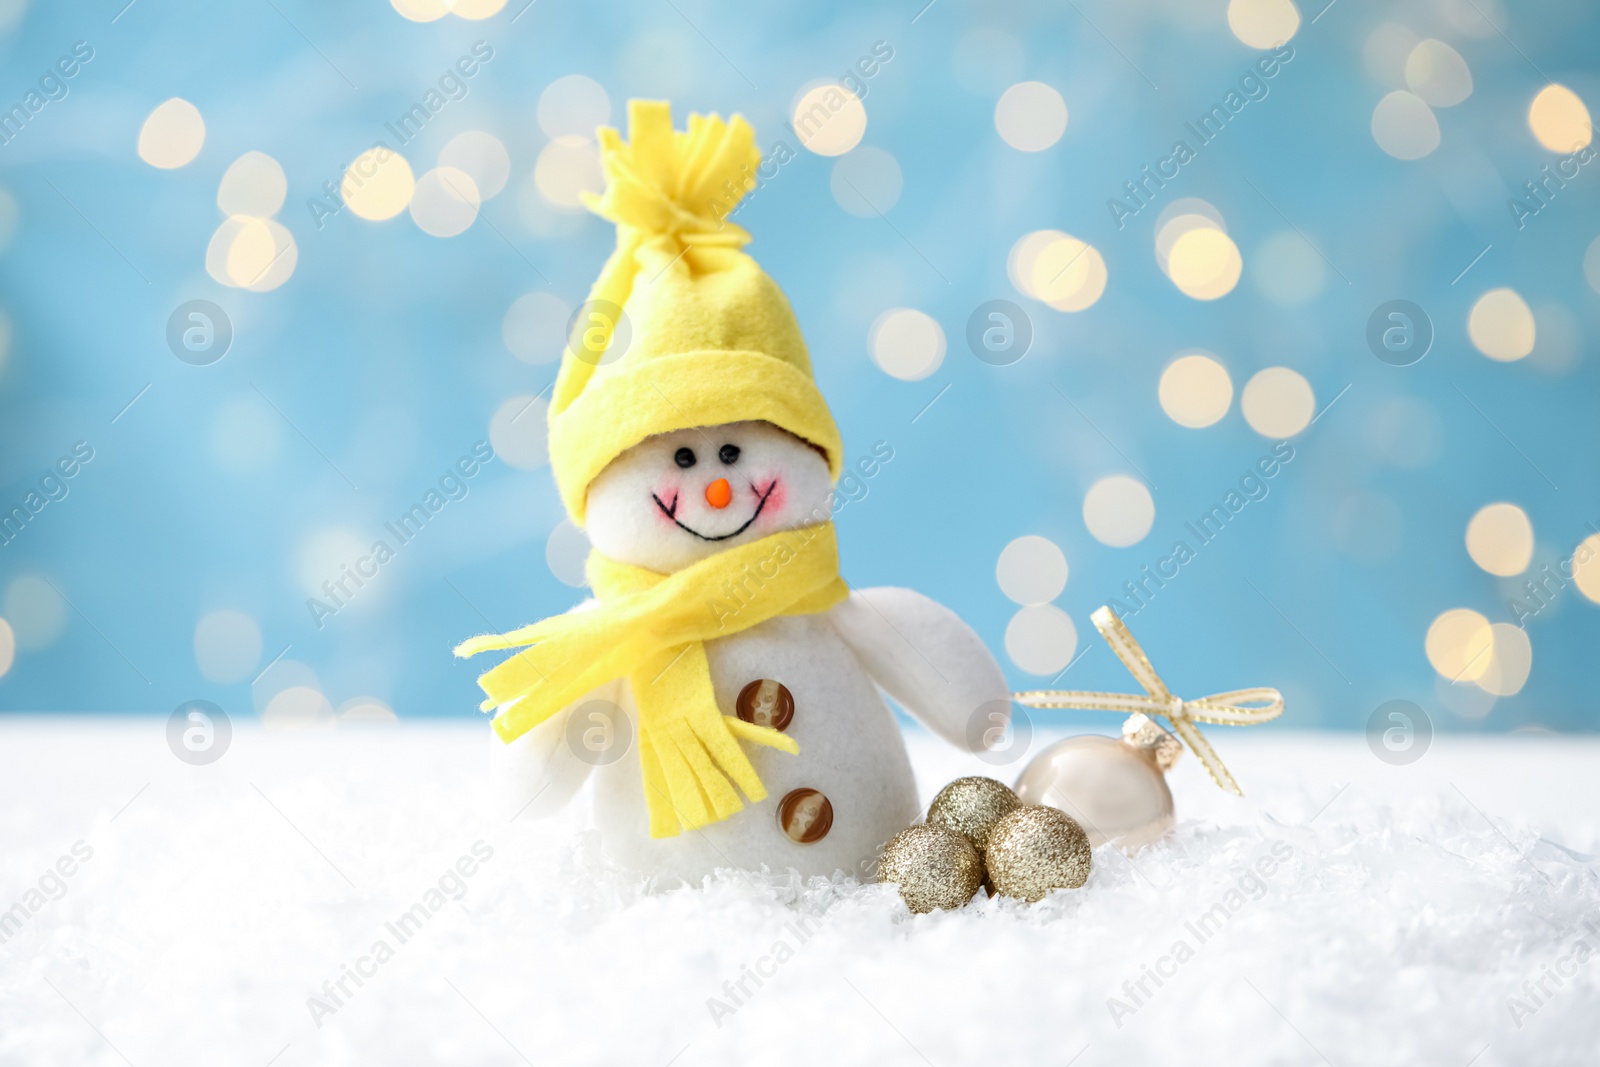 Photo of Snowman toy and Christmas balls on snow against blurred festive lights, closeup